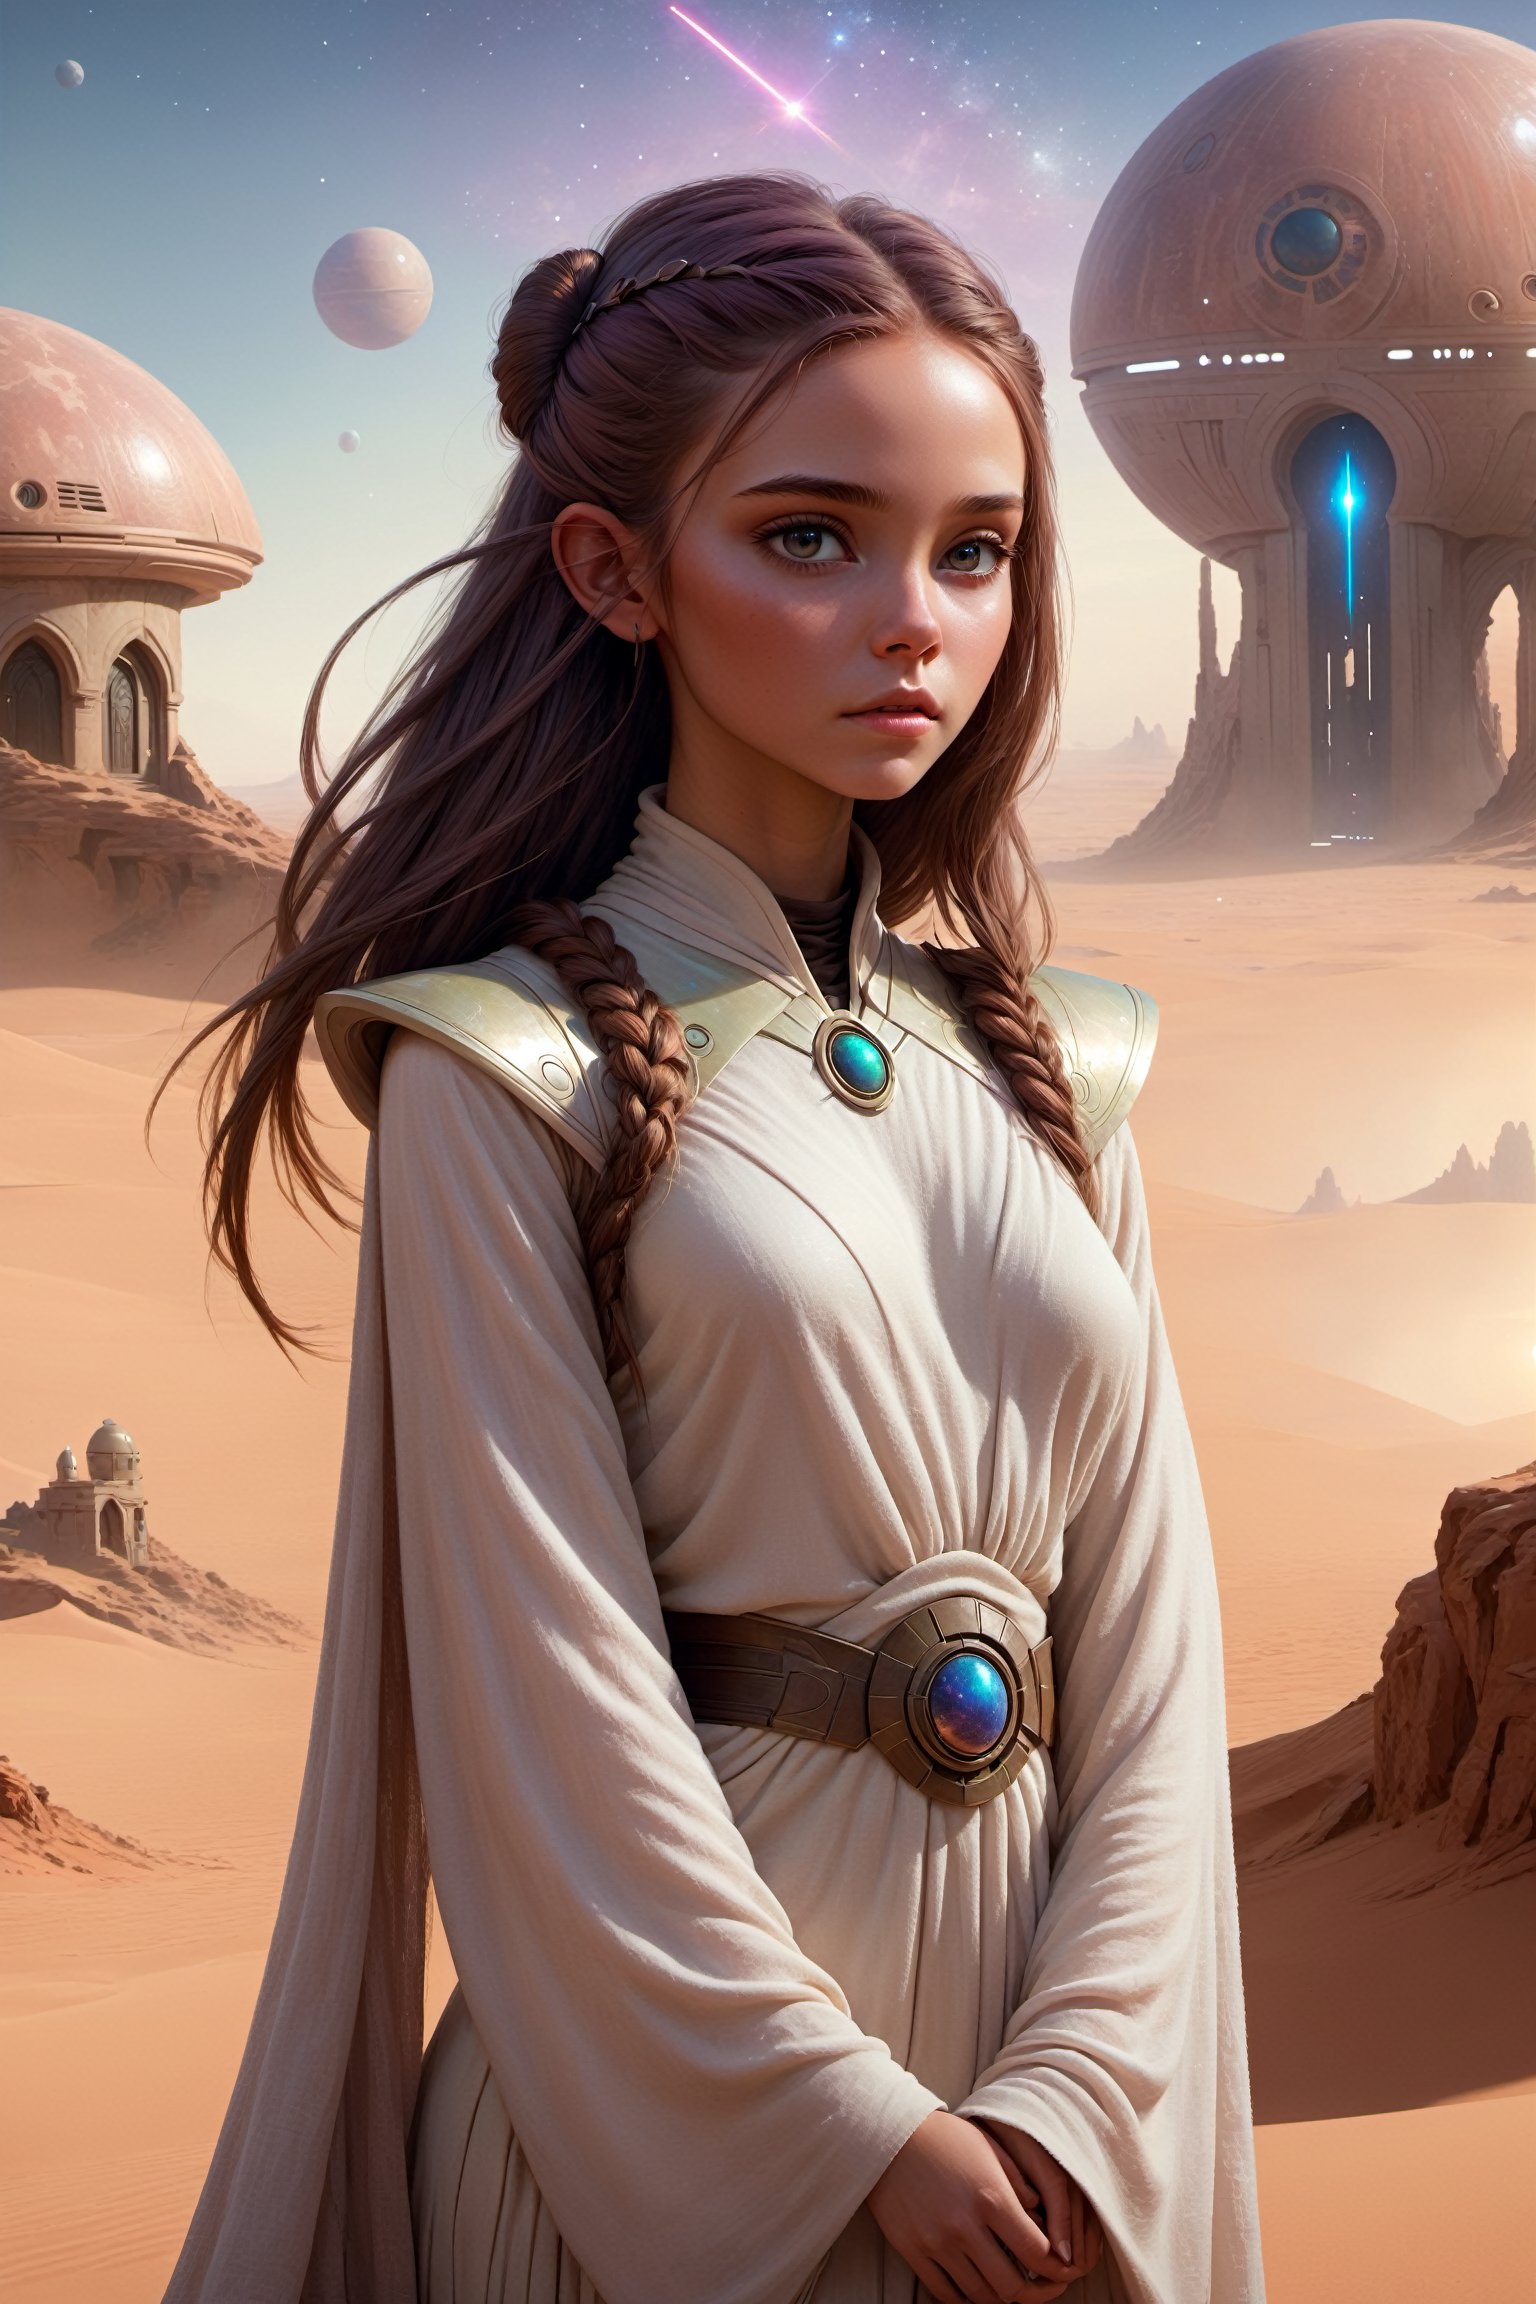 1girl, ethereal fantasy, concept art, bargandi hair, alien planet, Star Wars, magnificent, conservative cloths, beautiful face, celestial, ethereal, epic, majestic, magical, fantasy, desert, star war house